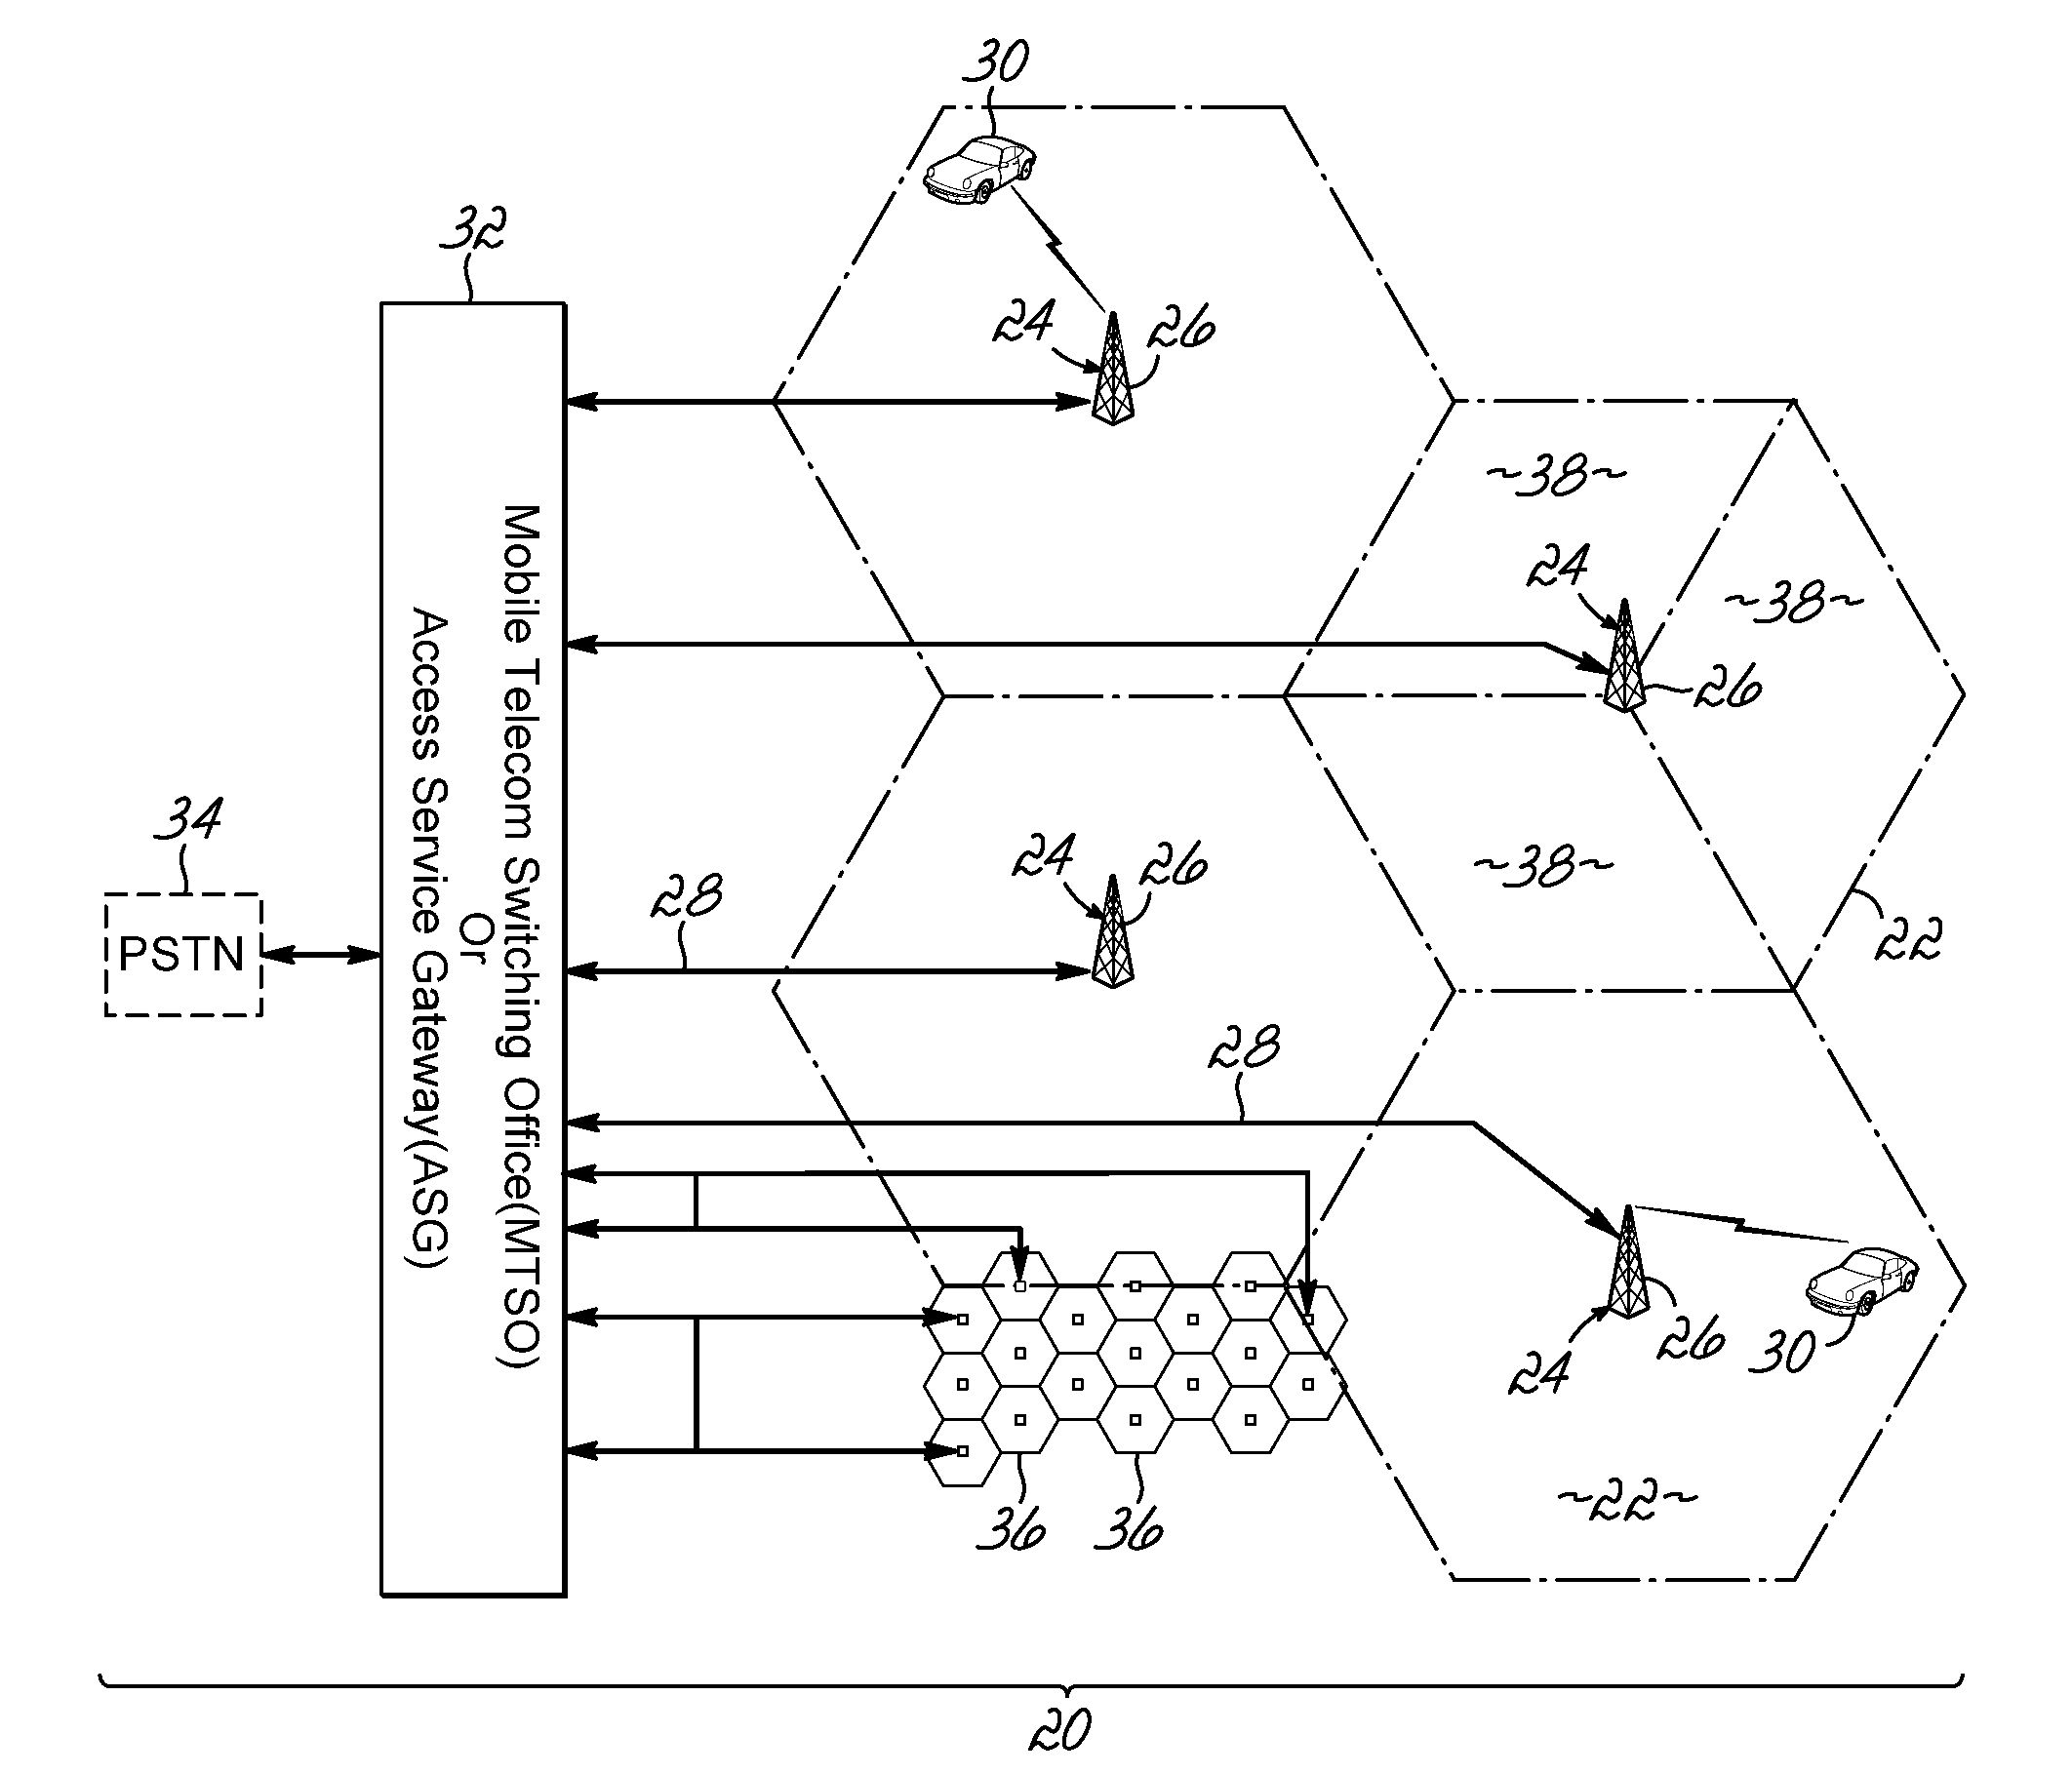 Distributed antenna system for wireless network systems